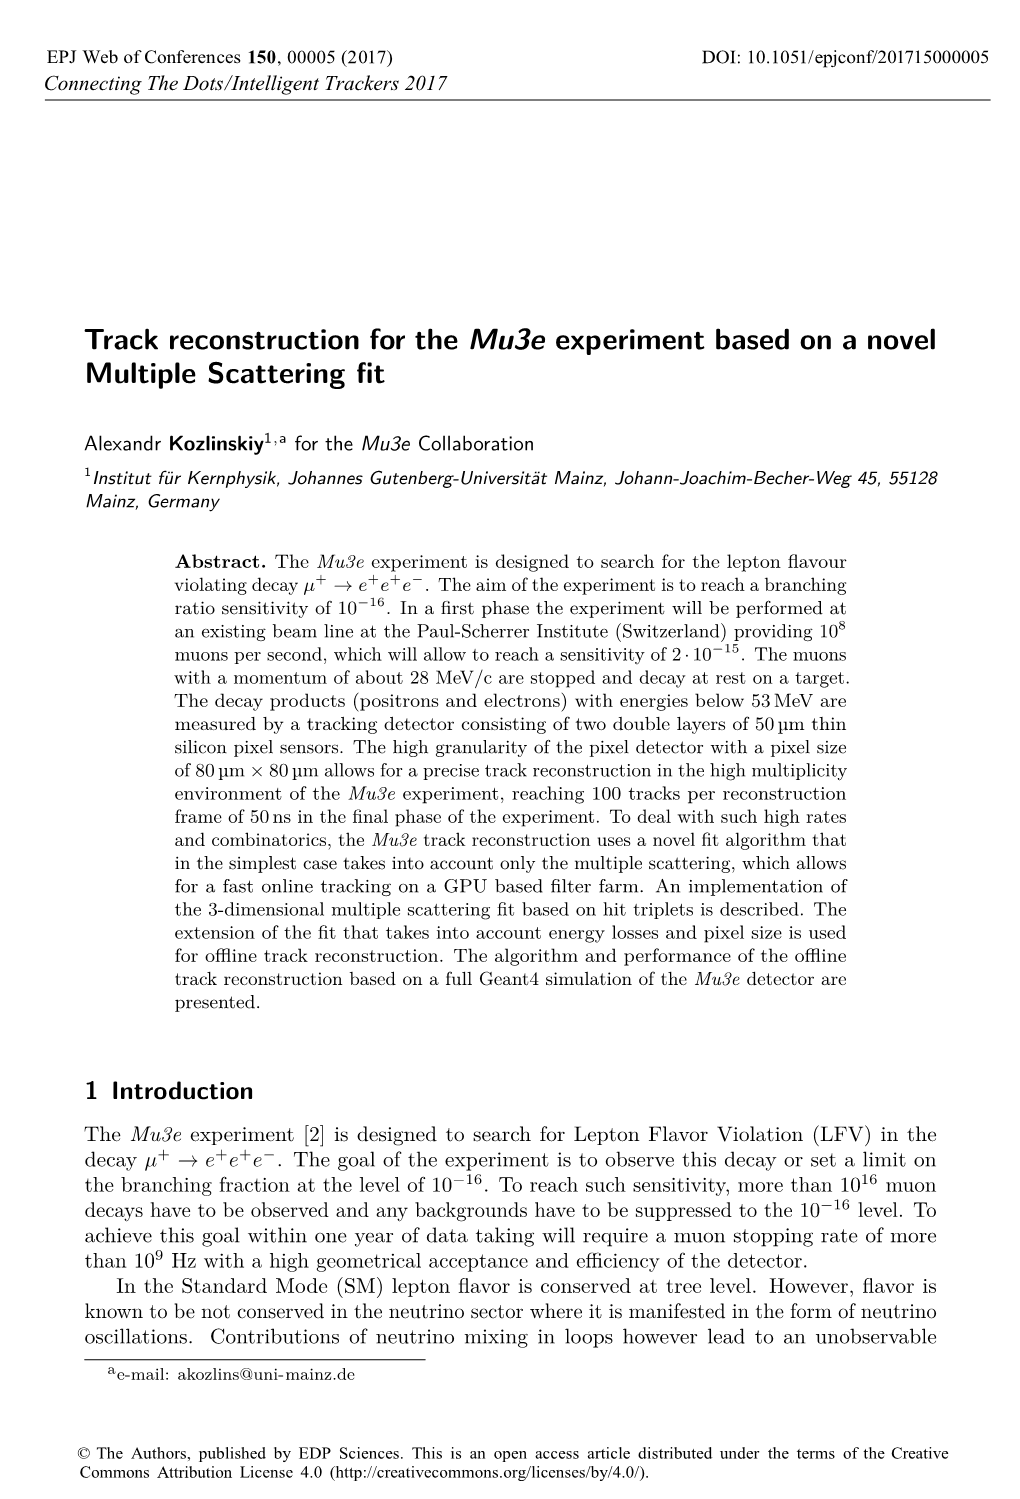 Track Reconstruction for the Mu3e Experiment Based on a Novel Multiple Scattering ﬁt